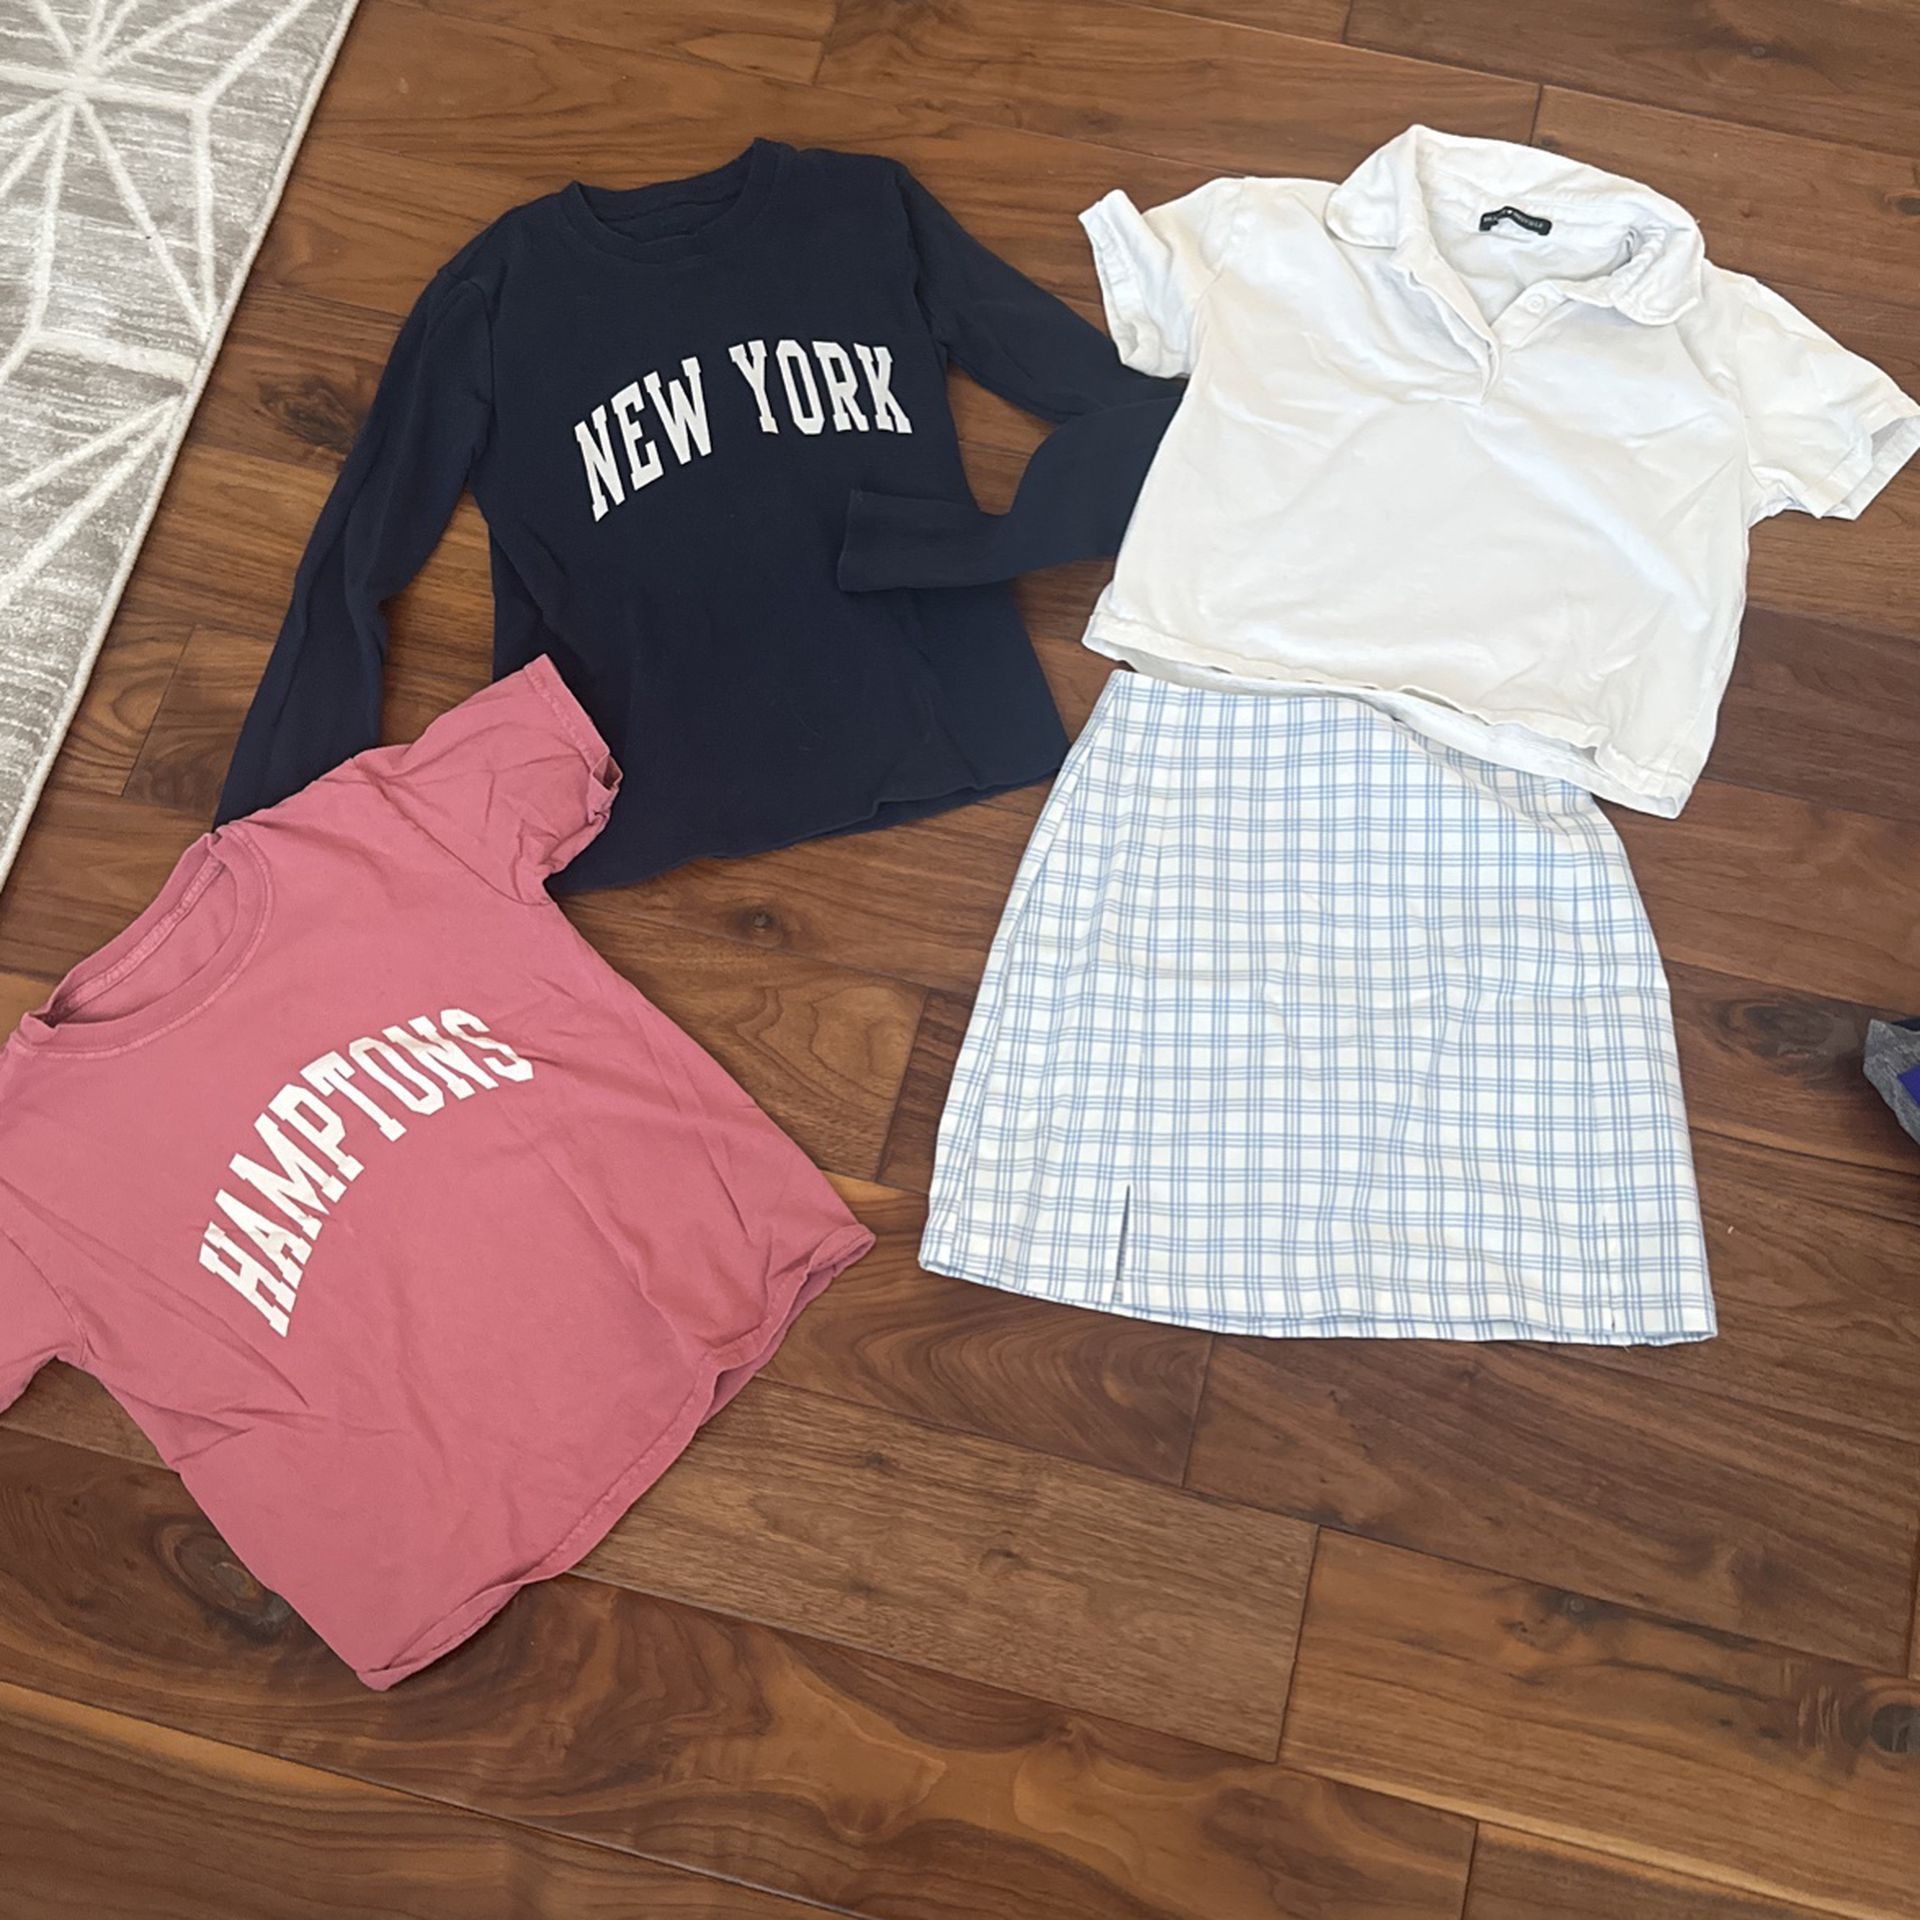 Brandy Melville Women's Clothes for sale in Southampton, New